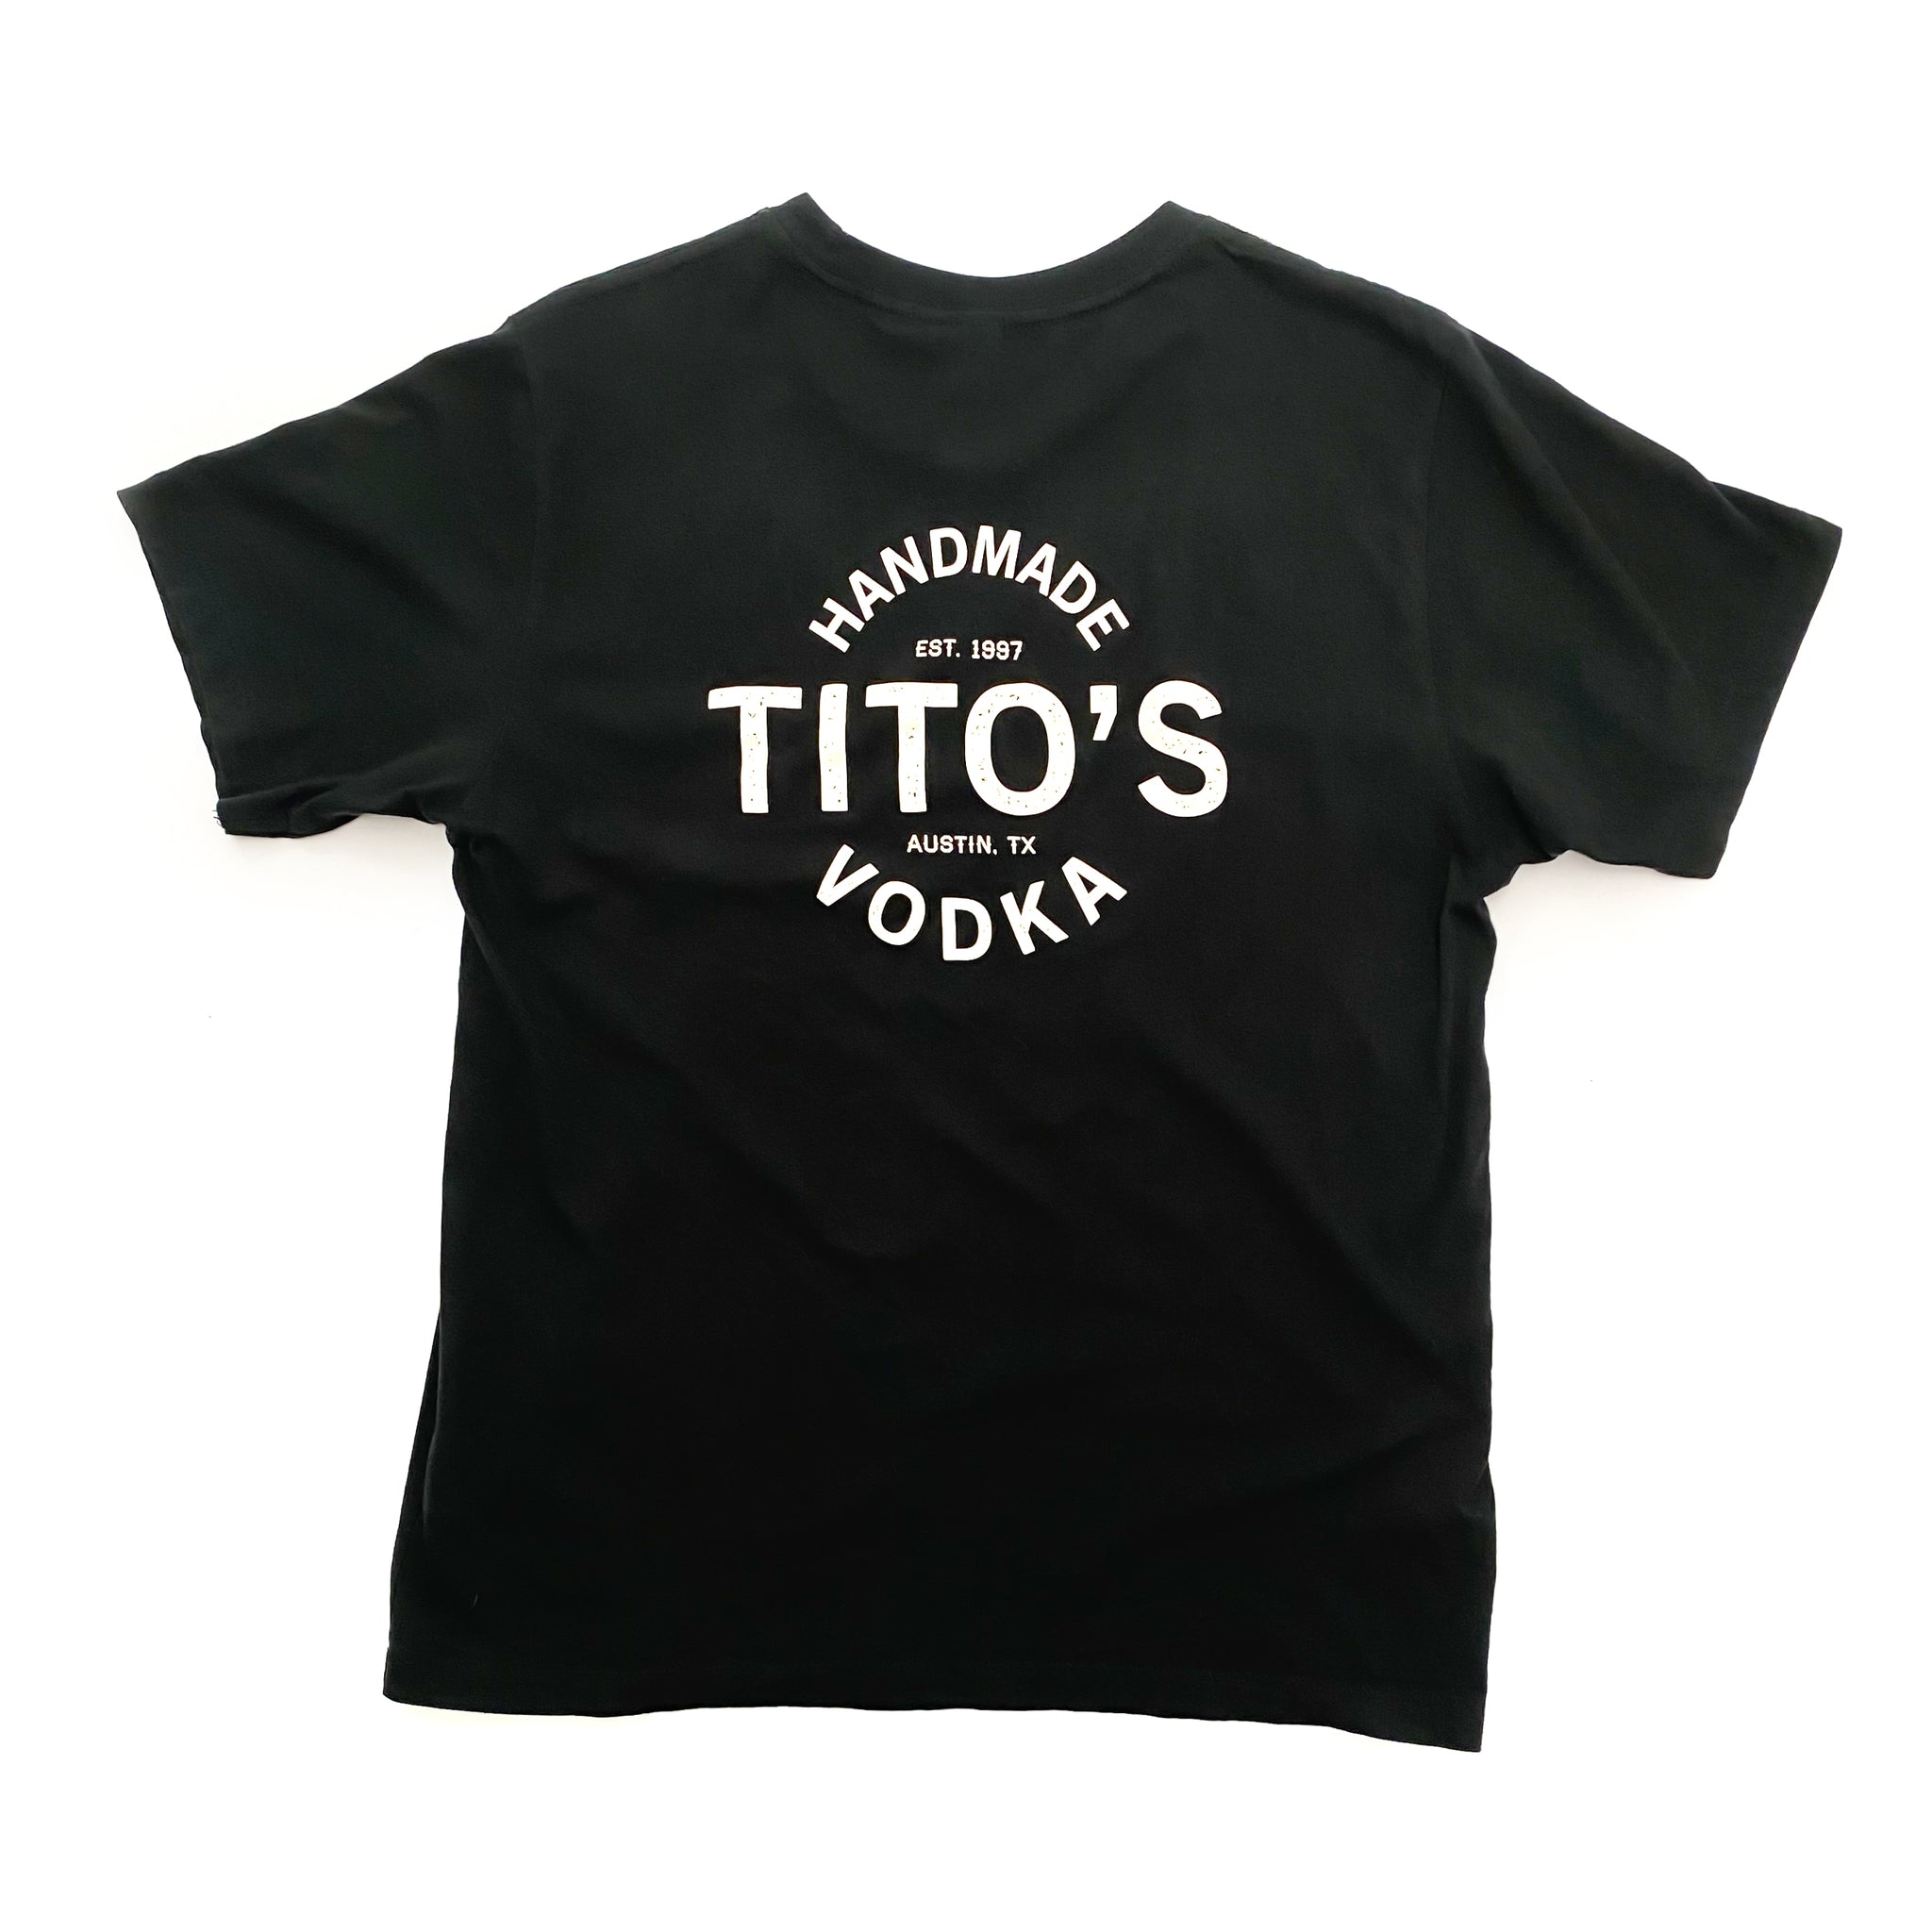 Back of black short-sleeved t-shirt with large design of Tito's Handmade Vodka, est. 1997, and Austin, TX